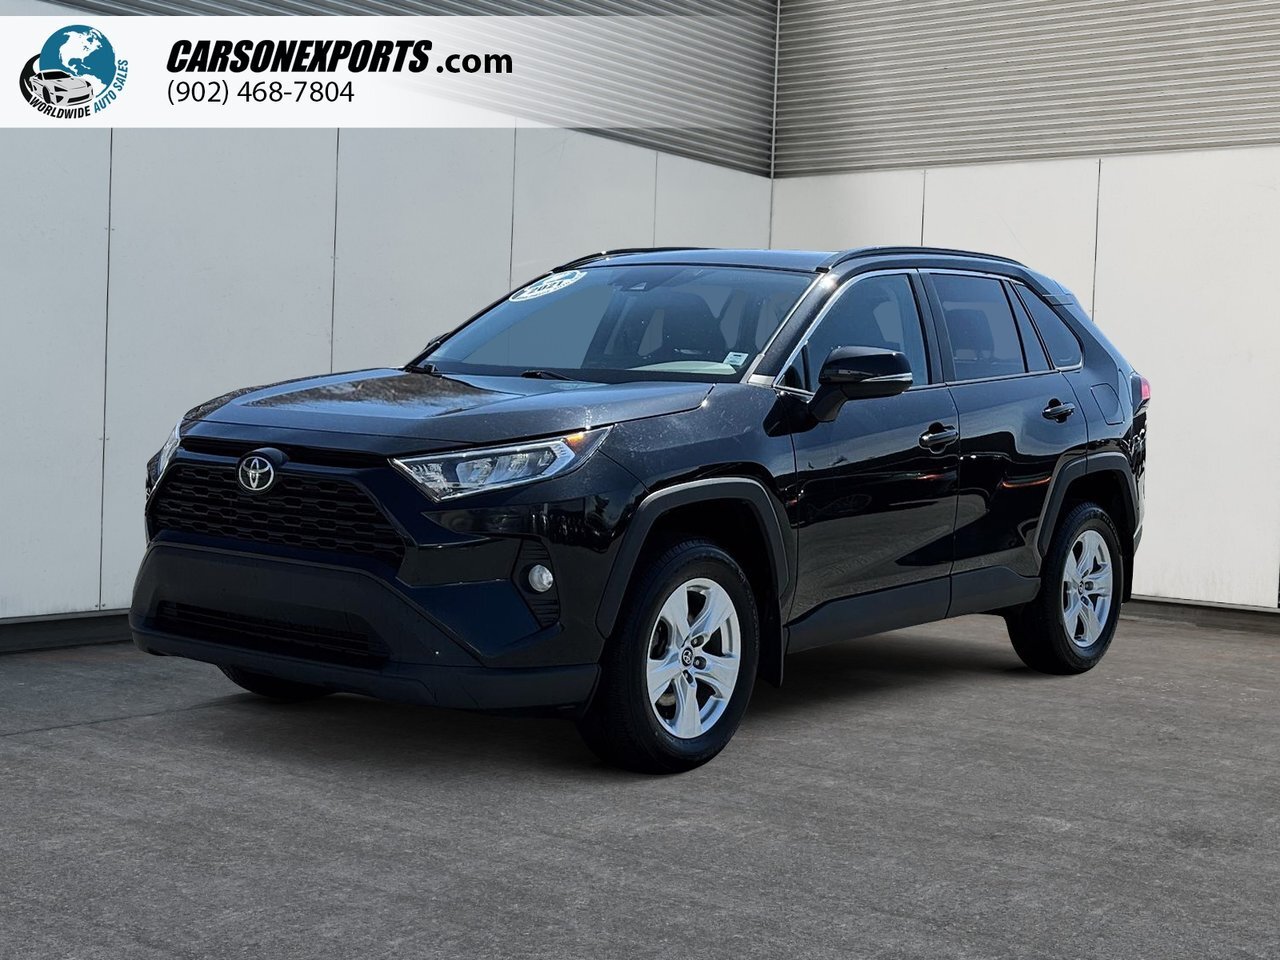 2021 Toyota RAV4 XLE The best place to buy a used car. Period.